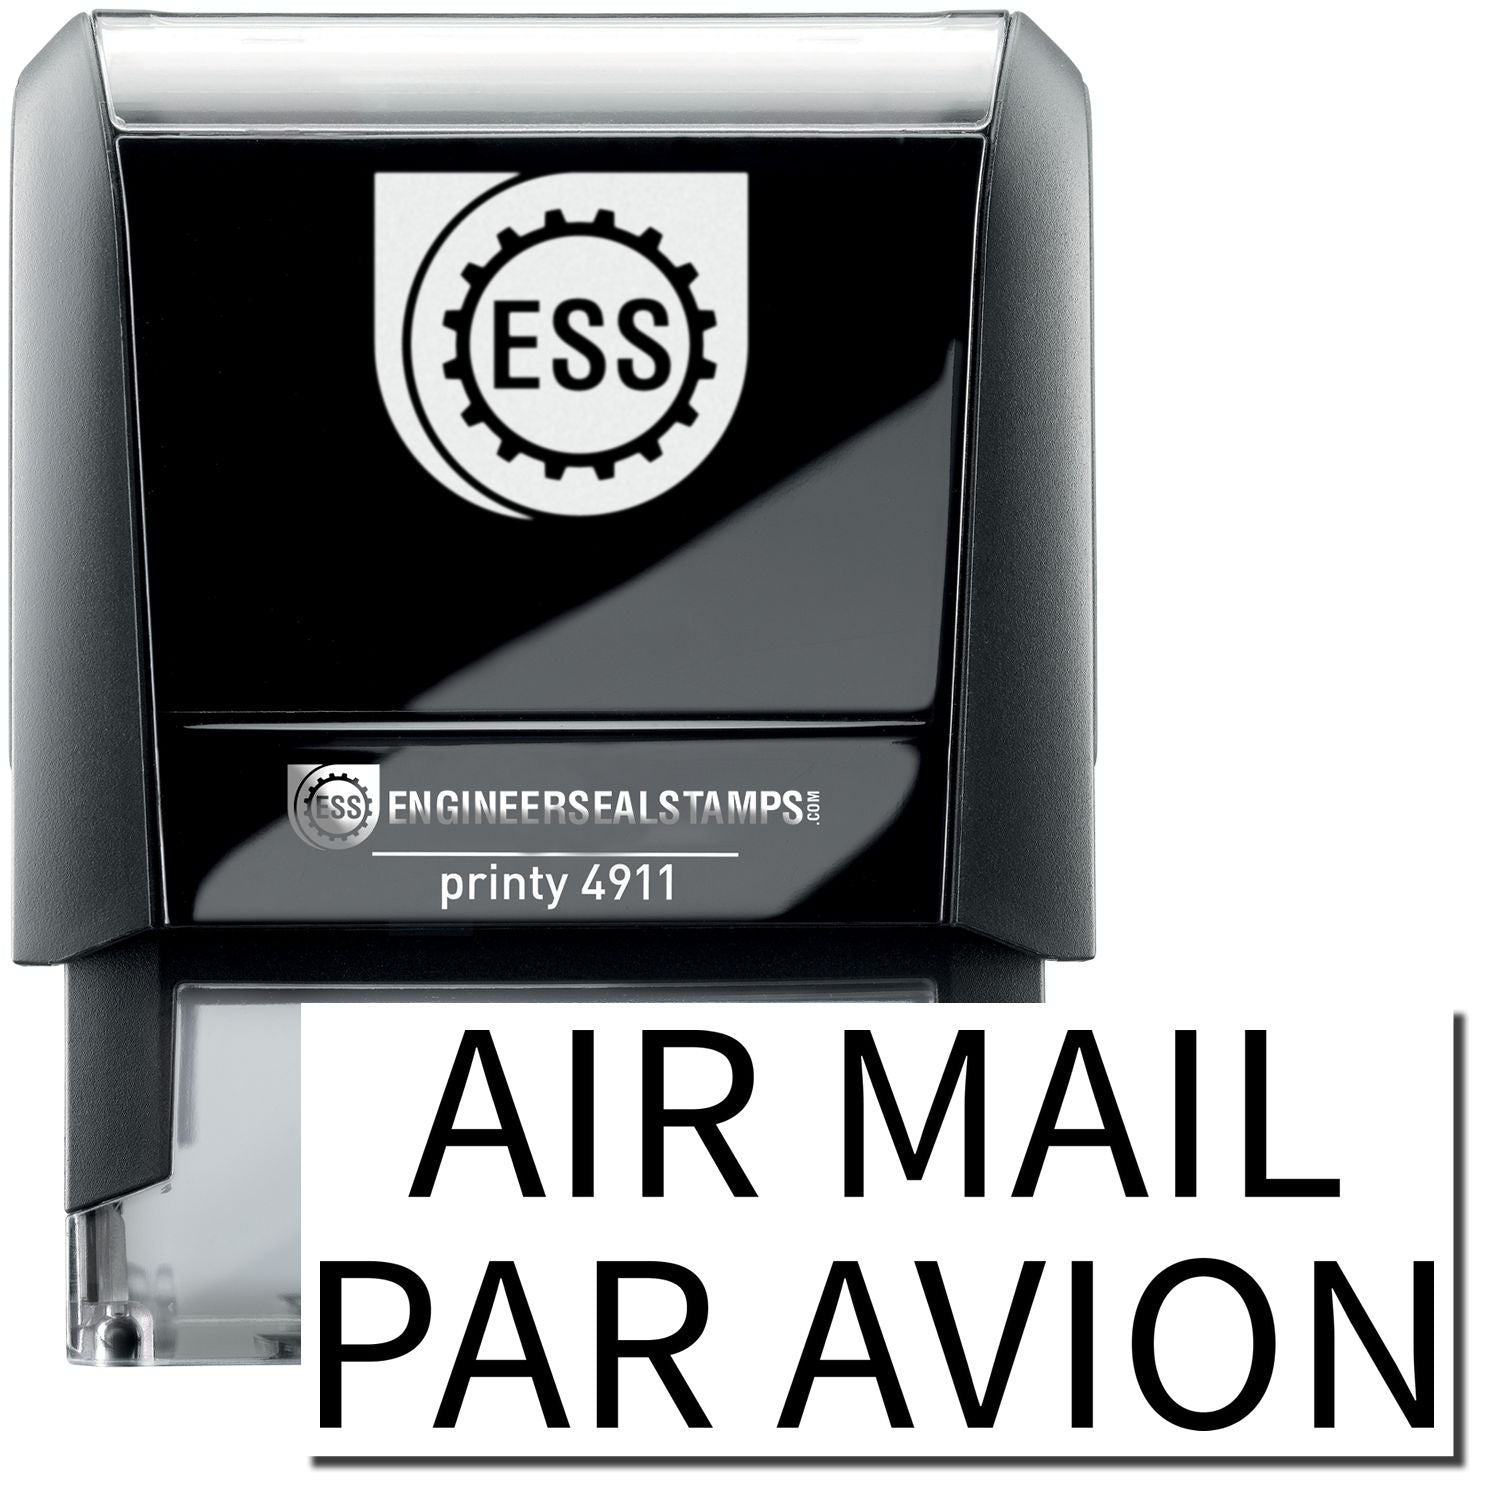 A self-inking stamp with a stamped image showing how the text "AIR MAIL PAR AVION" is displayed after stamping.